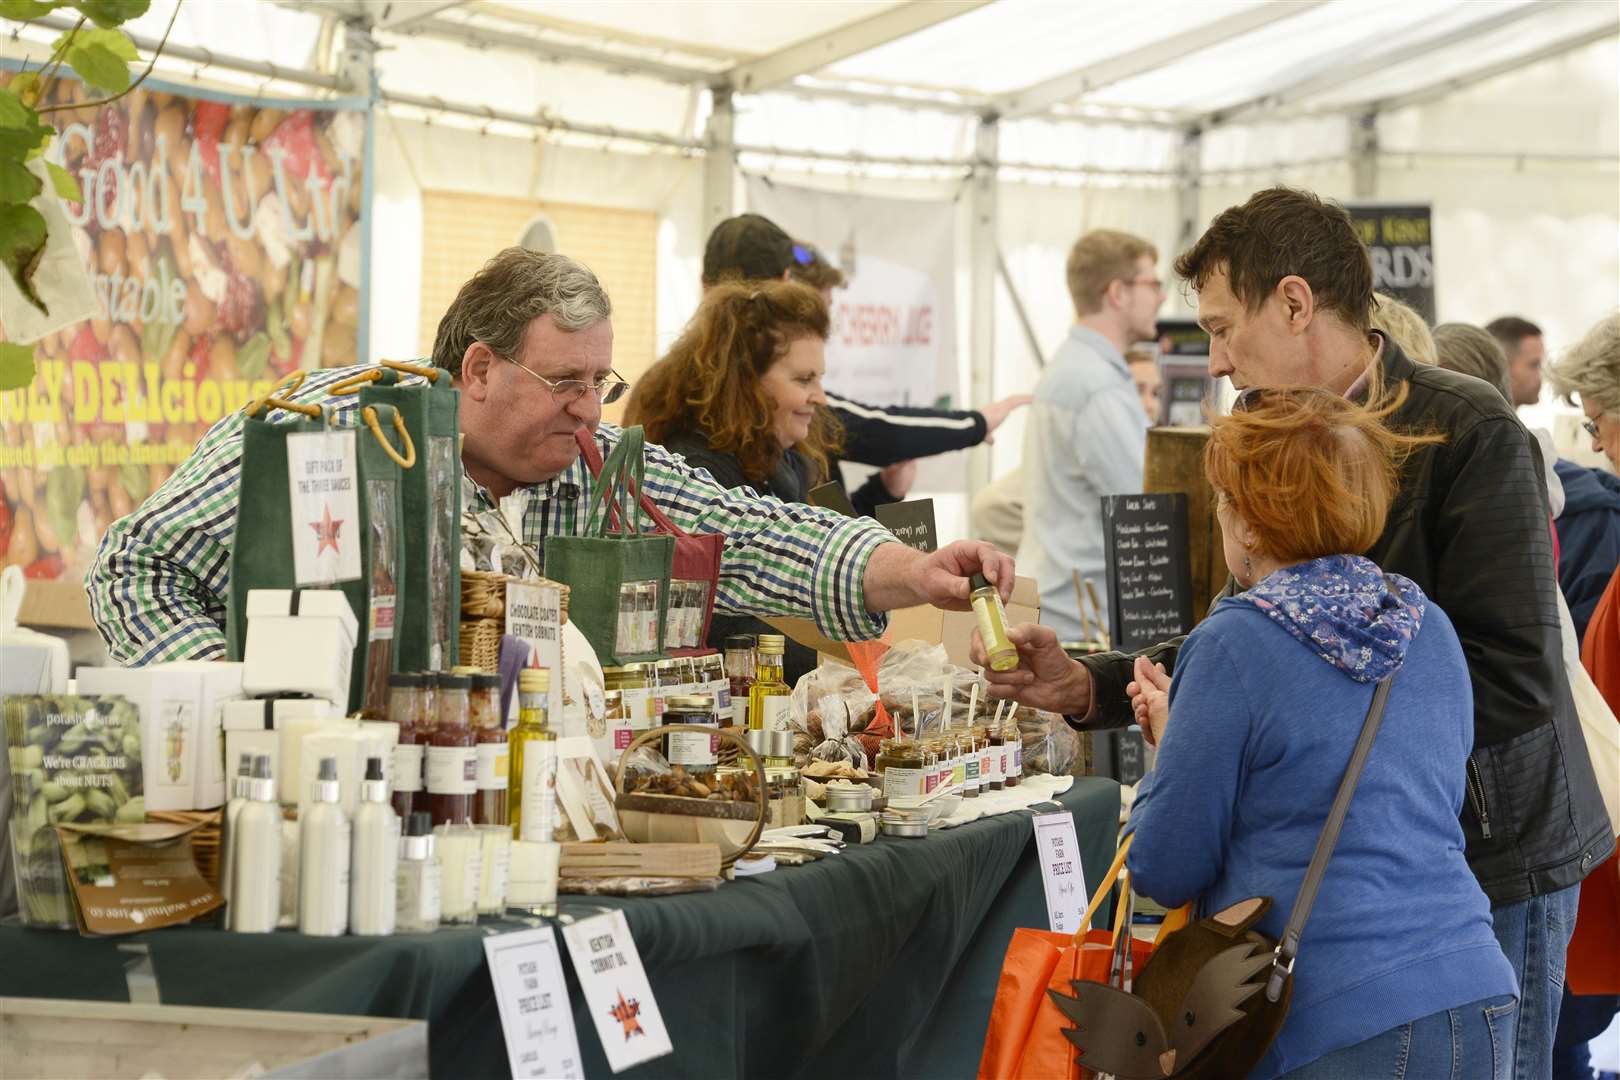 Canterbury Food and Drink Festival 2022 is due to feature more than 100 traders. Picture: Paul Amos